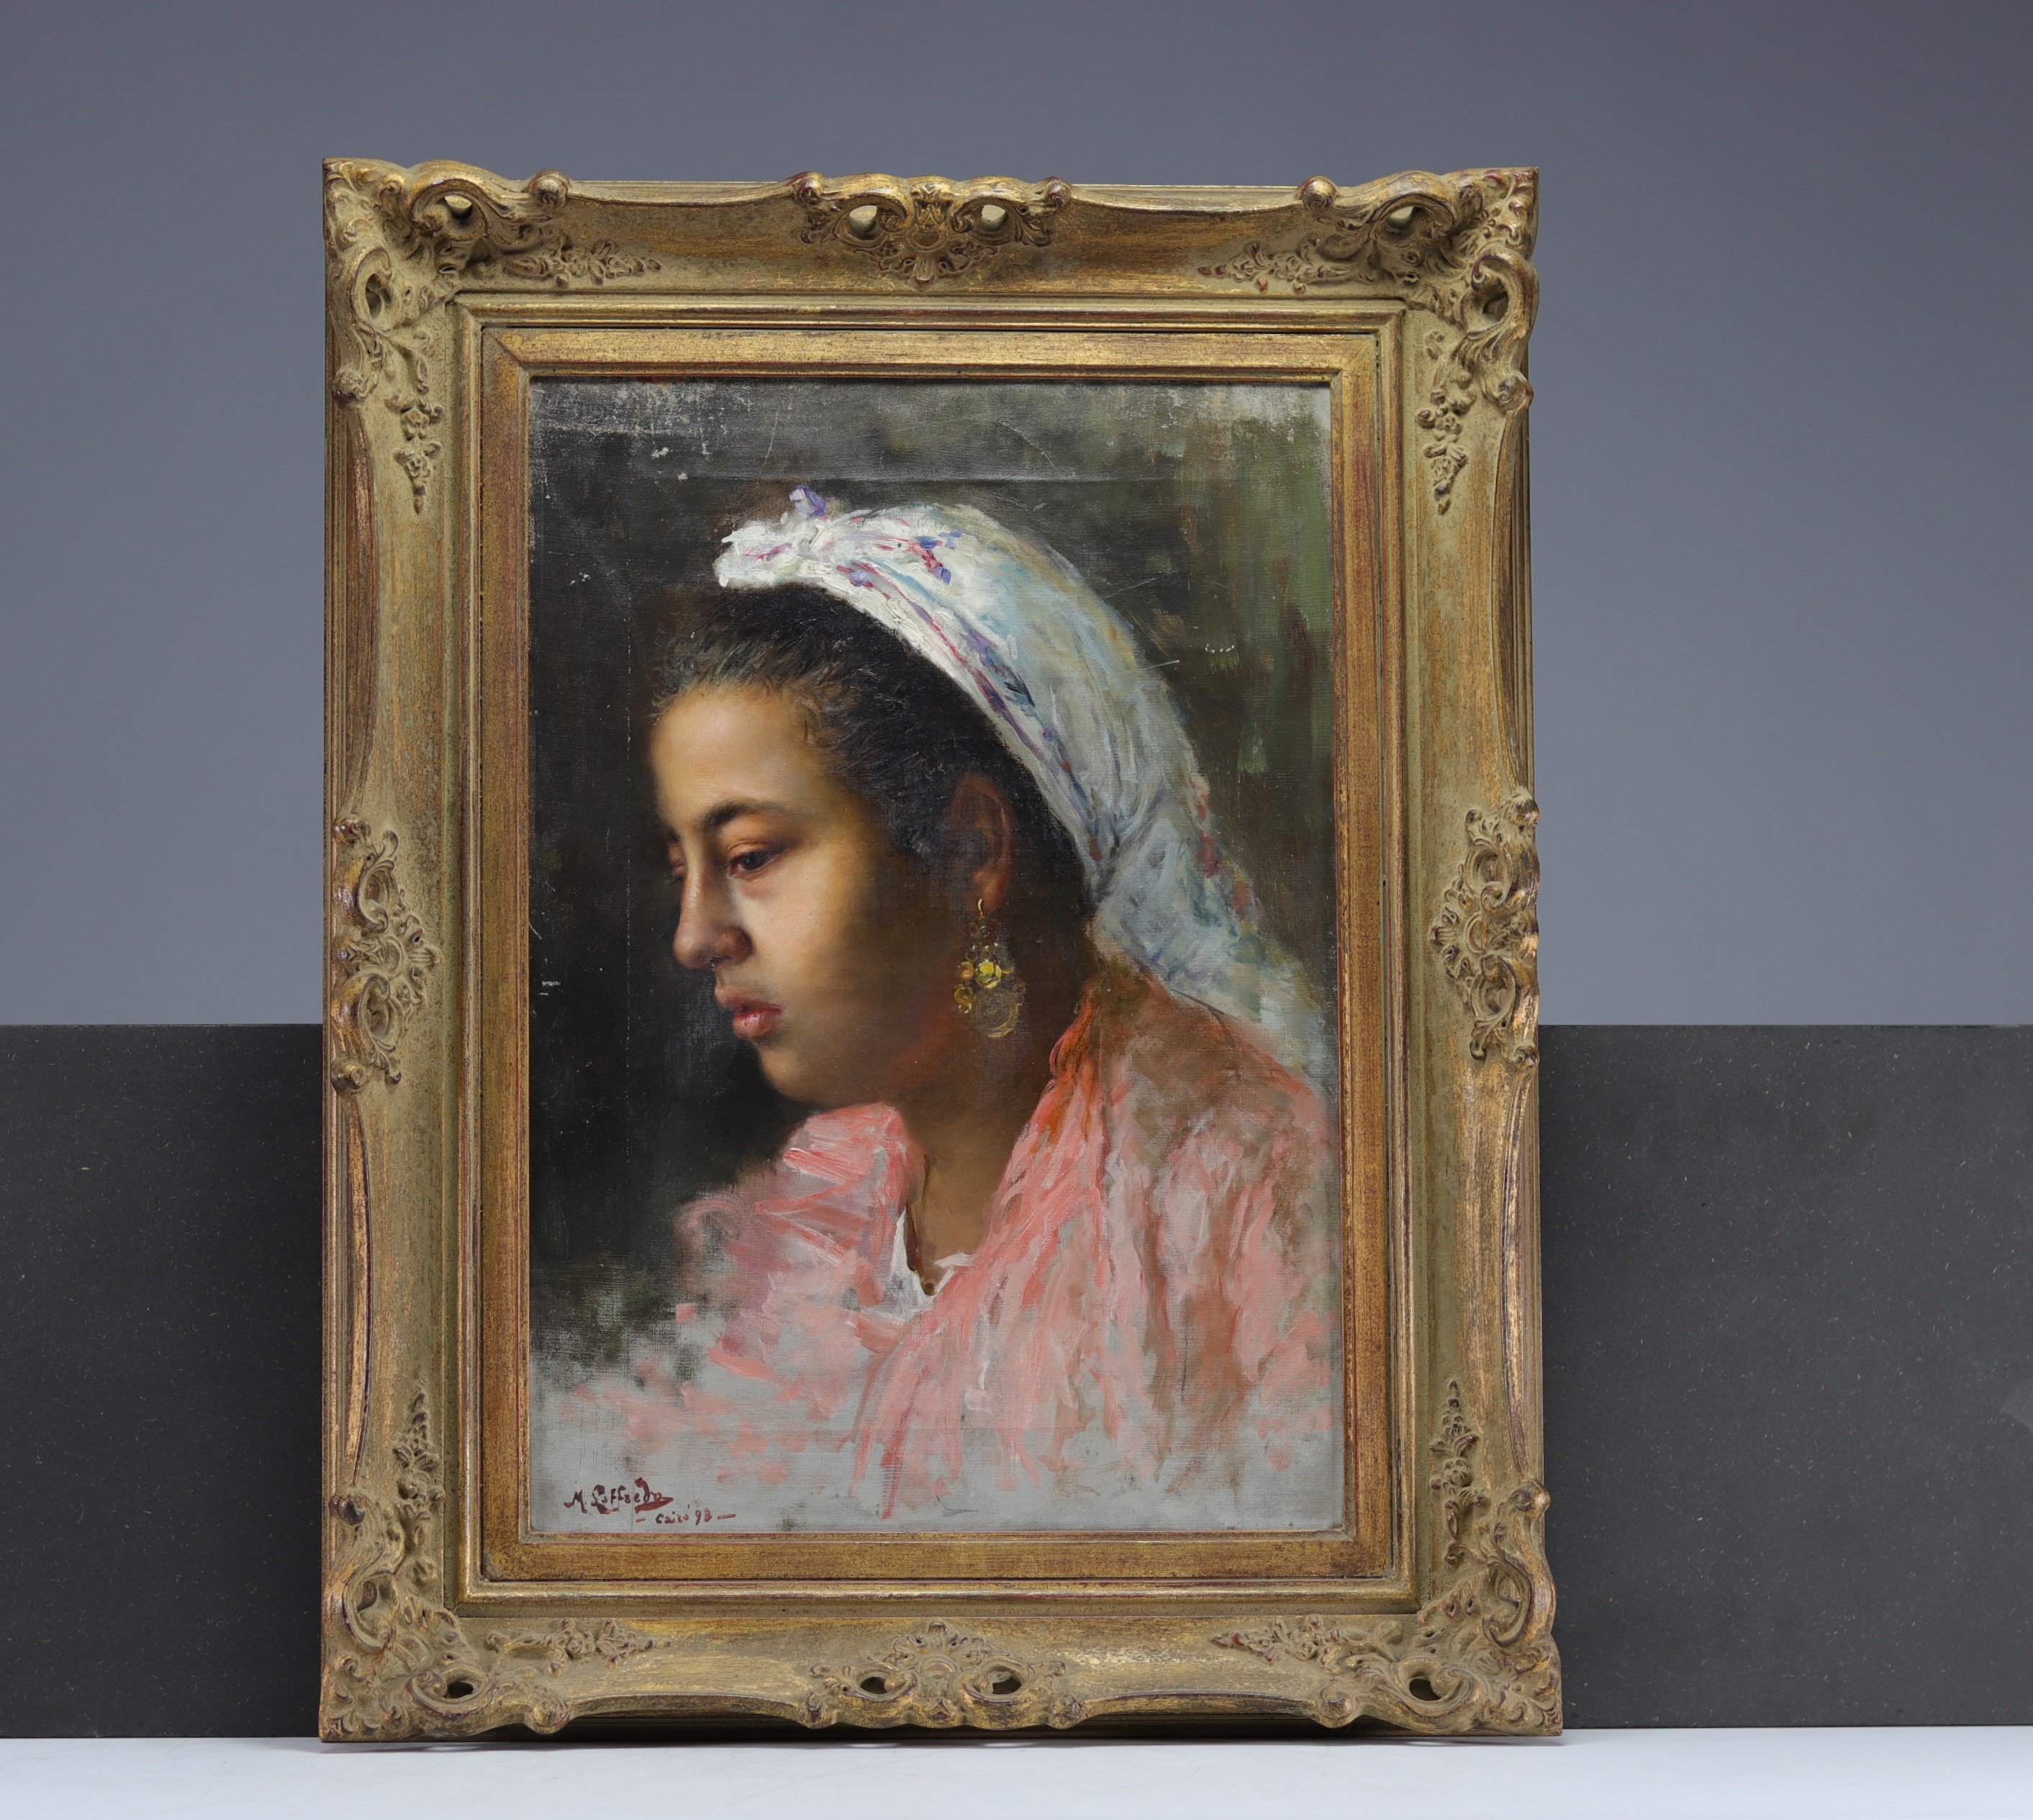 Michele LOFFREDO (1870-1961), Pair of Orientalist Portraits, oil on canvas signed and dated 1898. - Image 3 of 3